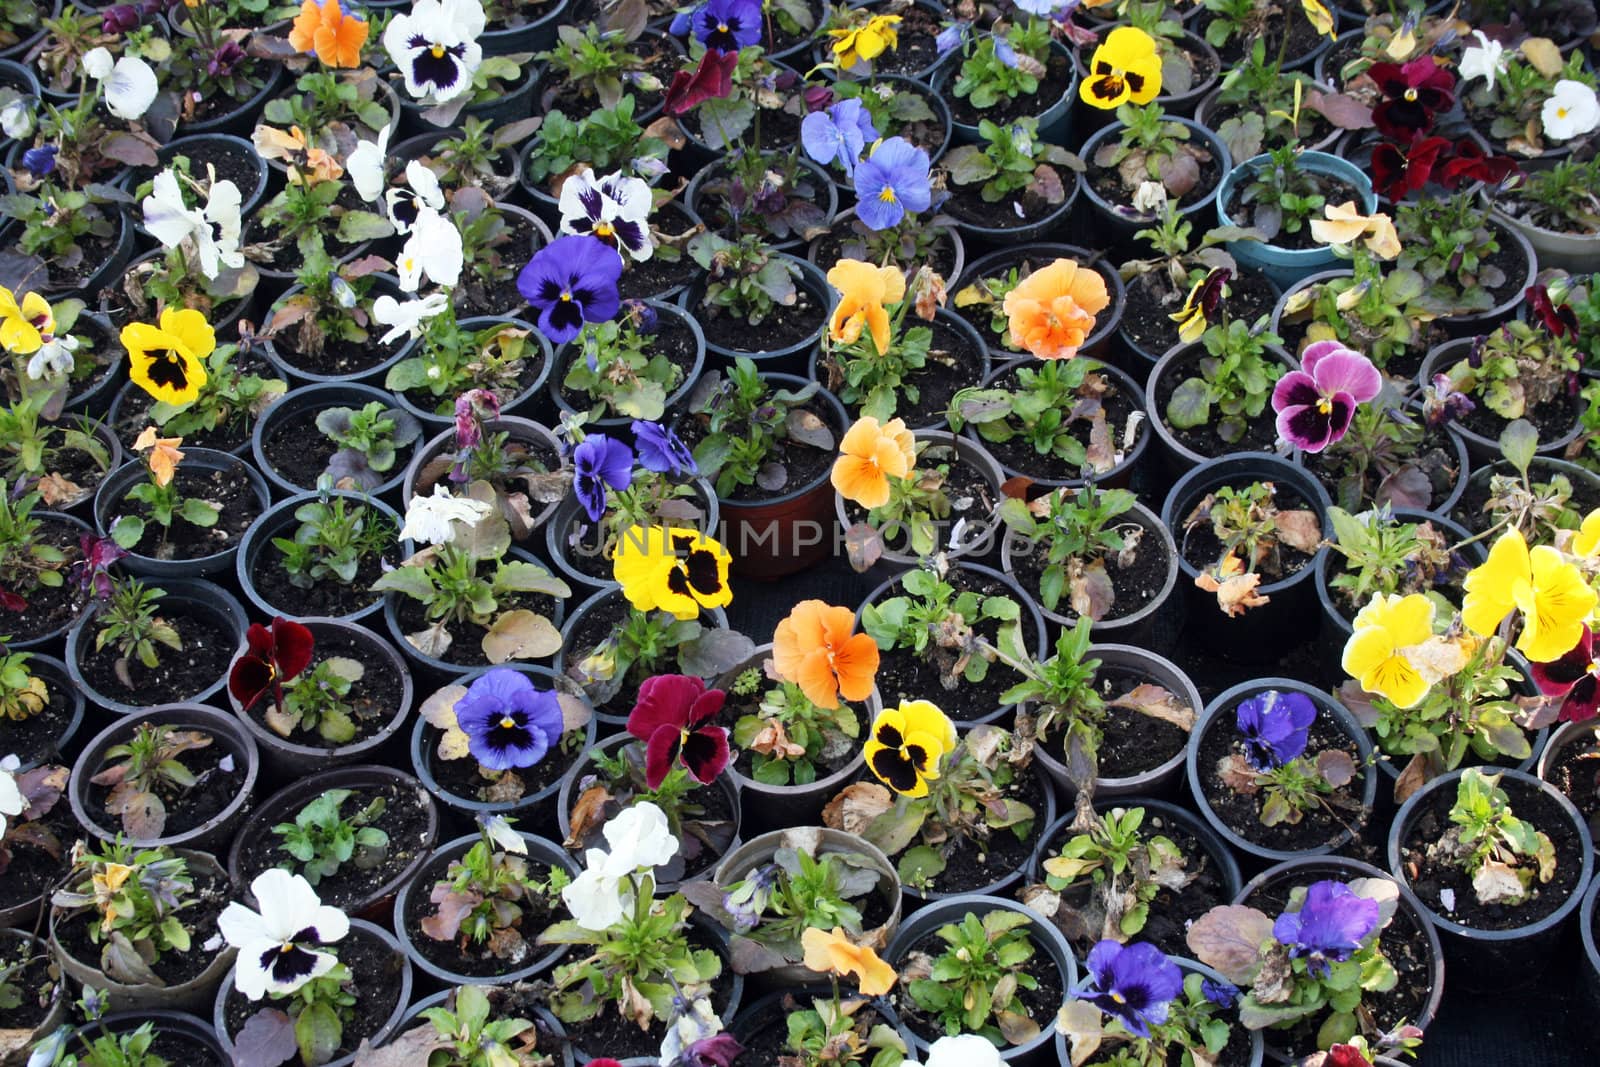 Greenhouse farming of colorful flowers